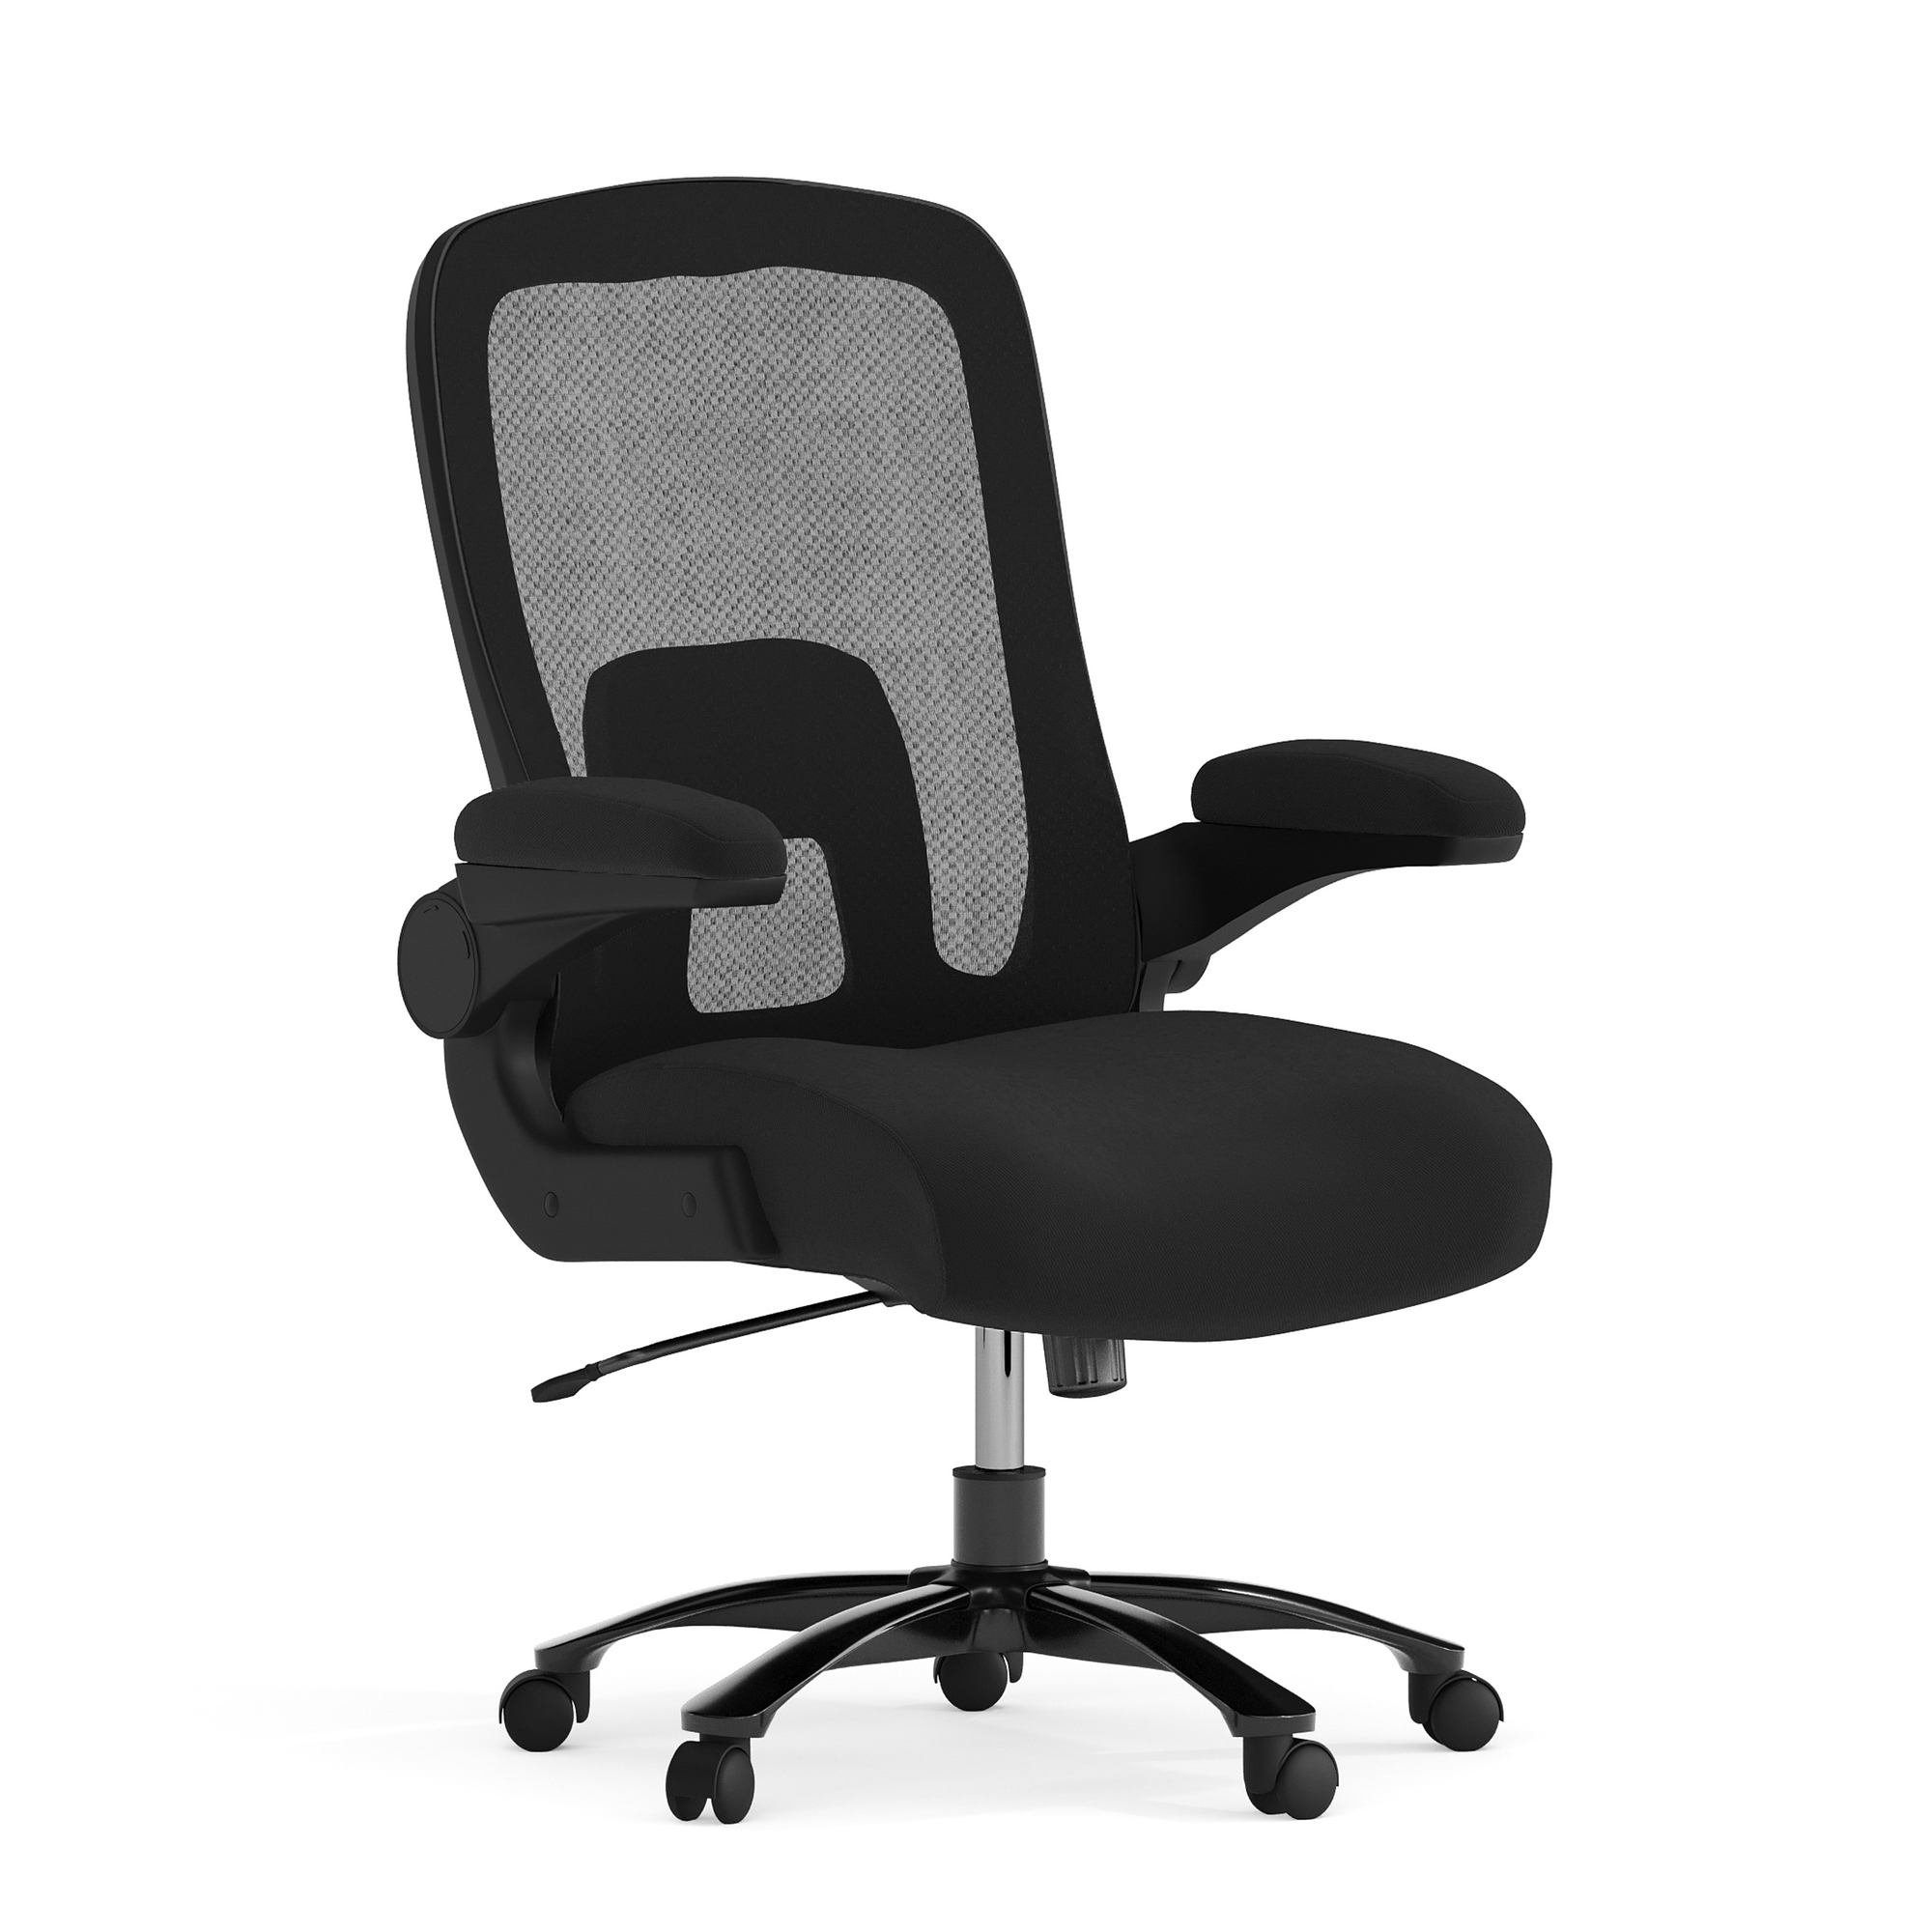 Flash Furniture, Big Tall 500 lb. Rated Black Mesh/Fabric Chair, Primary Color Black, Included (qty.) 1, Model BT20180